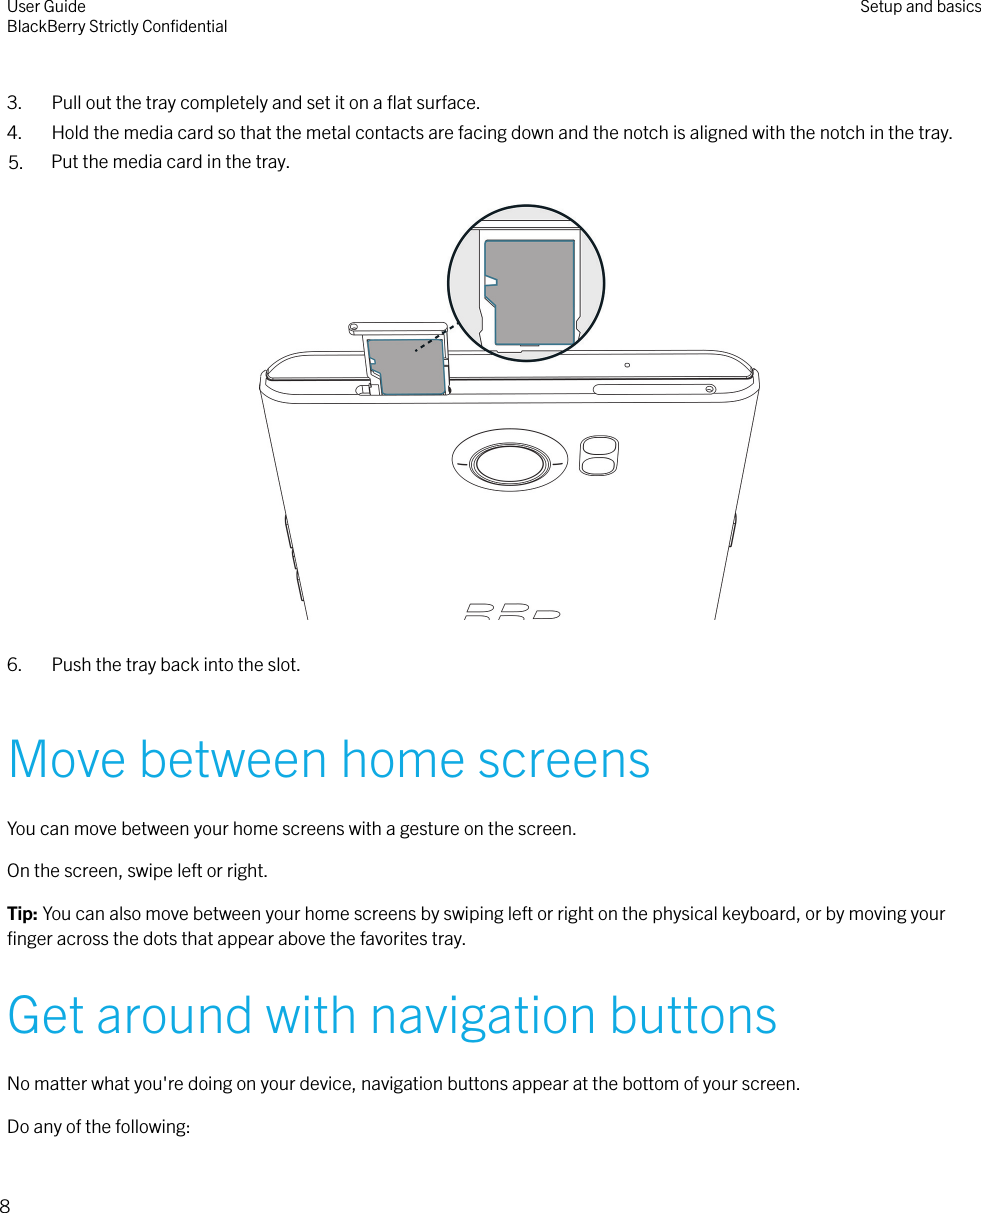  3. Pull out the tray completely and set it on a ﬂat surface.4. Hold the media card so that the metal contacts are facing down and the notch is aligned with the notch in the tray.5. Put the media card in the tray.  6. Push the tray back into the slot.Move between home screensYou can move between your home screens with a gesture on the screen.On the screen, swipe left or right.Tip: You can also move between your home screens by swiping left or right on the physical keyboard, or by moving yourﬁnger across the dots that appear above the favorites tray.Get around with navigation buttonsNo matter what you&apos;re doing on your device, navigation buttons appear at the bottom of your screen.Do any of the following:User GuideBlackBerry Strictly ConﬁdentialSetup and basics8